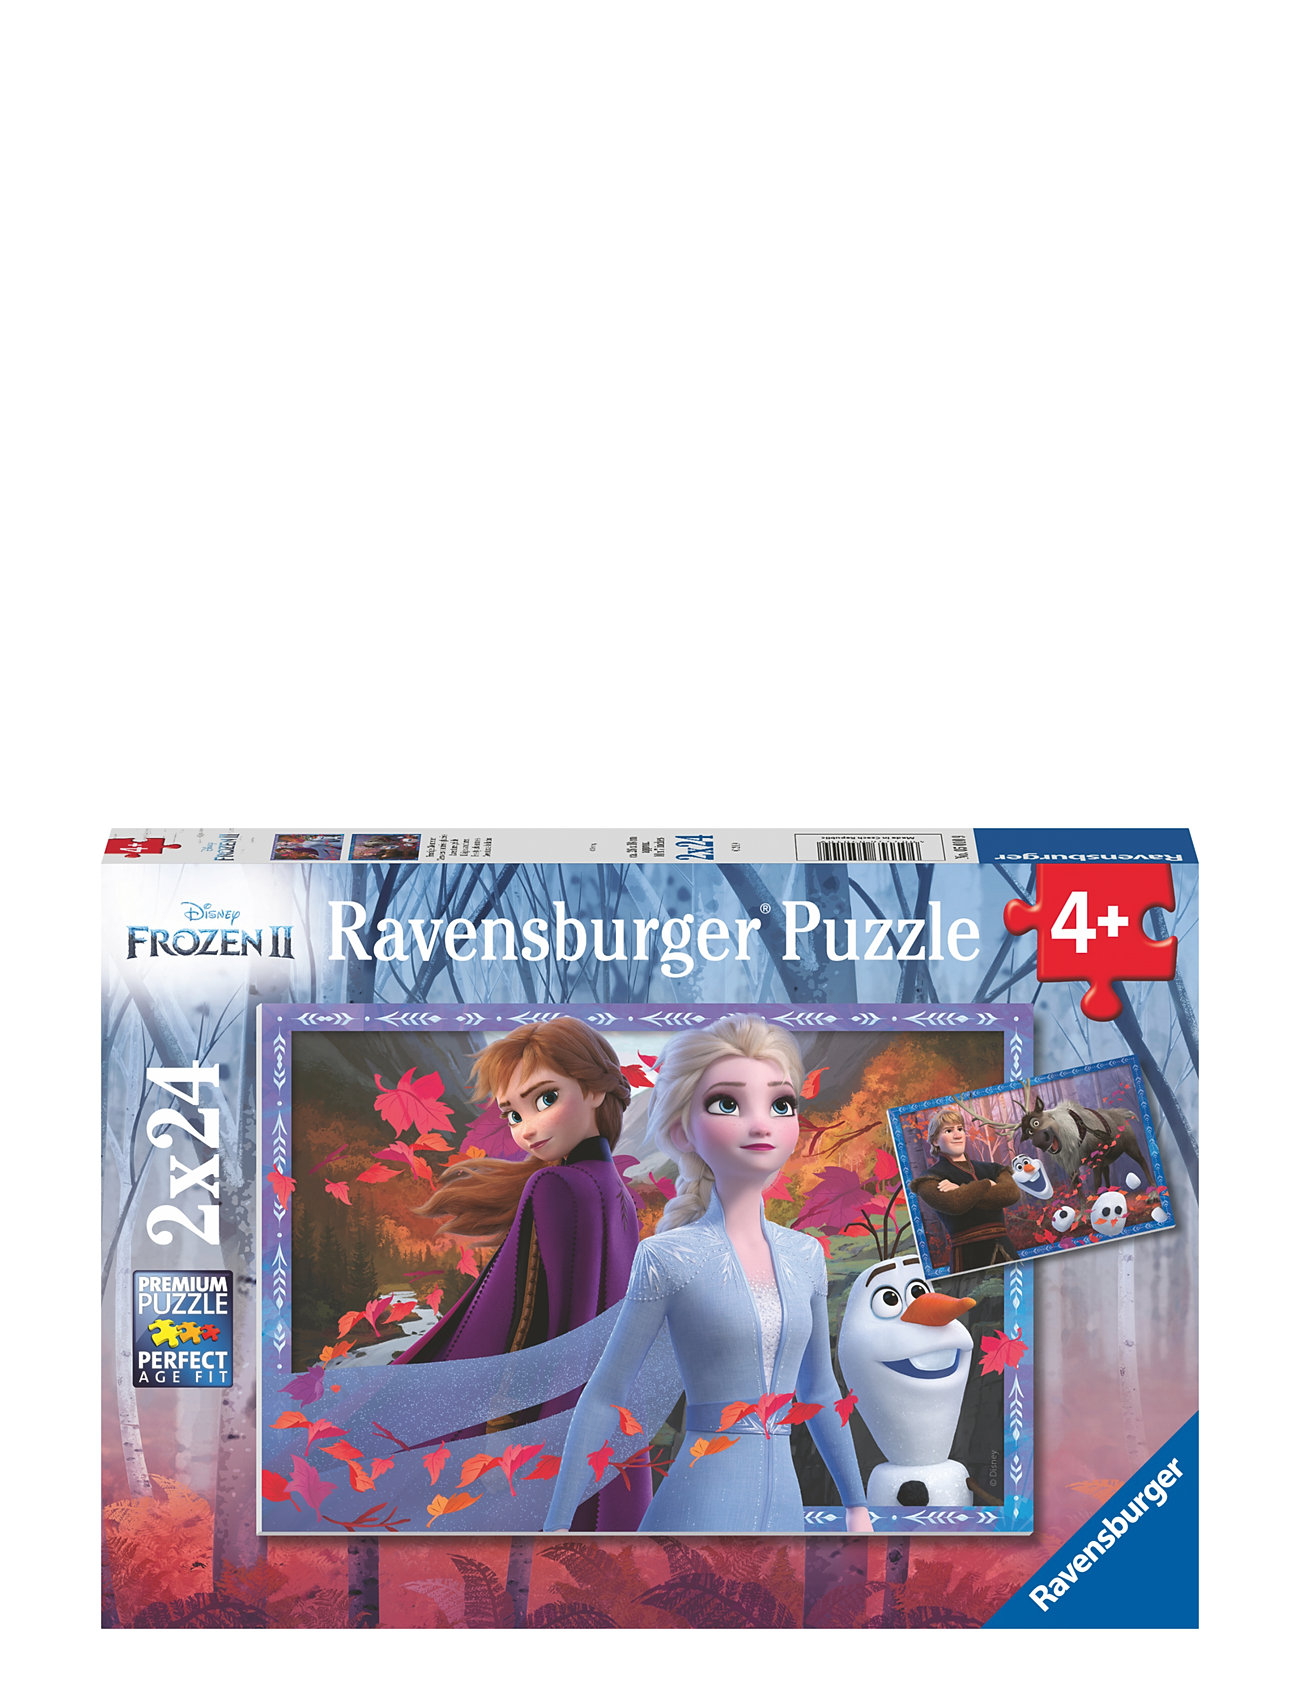 Frozen 2 Frosty Adventures 2X24P Toys Puzzles And Games Puzzles Classic Puzzles Multi/patterned Ravensburger